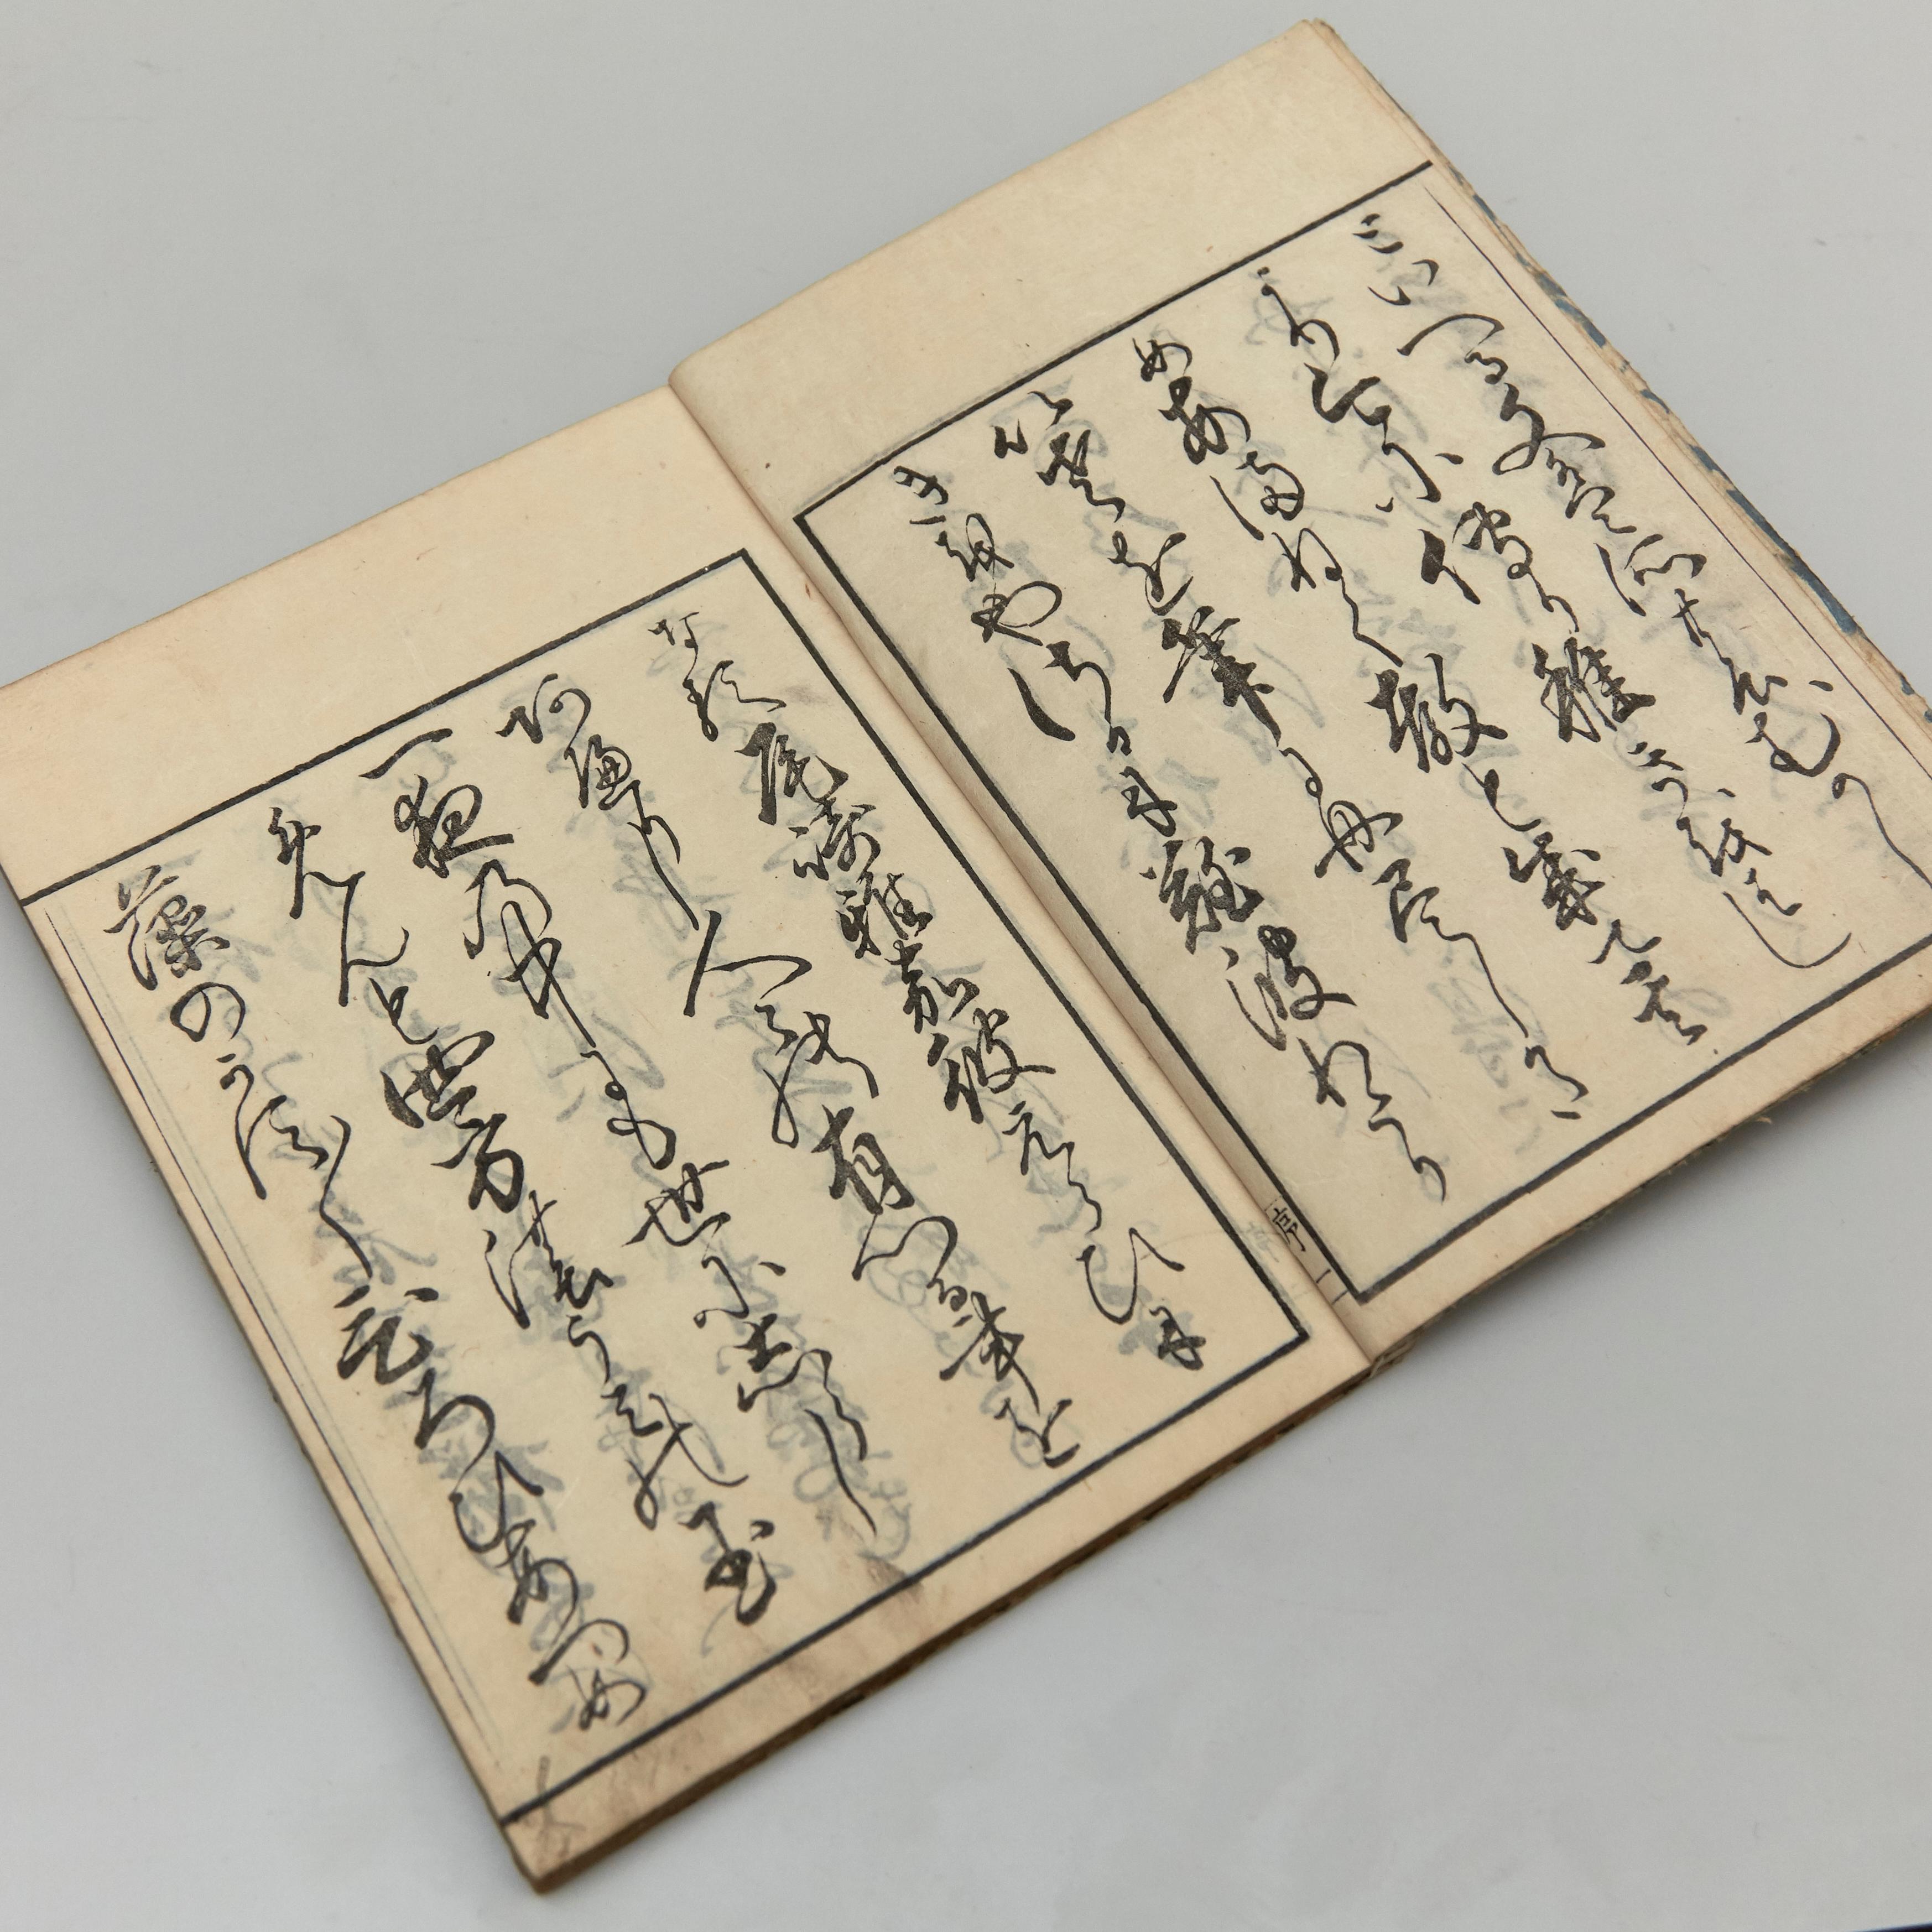 Antique Japanese Oraimono book Edo period, circa 1833
Woodblock print book

Book dimensions: 260 mm x 180 mm

There are damages because it is antique item as we show on the photos.